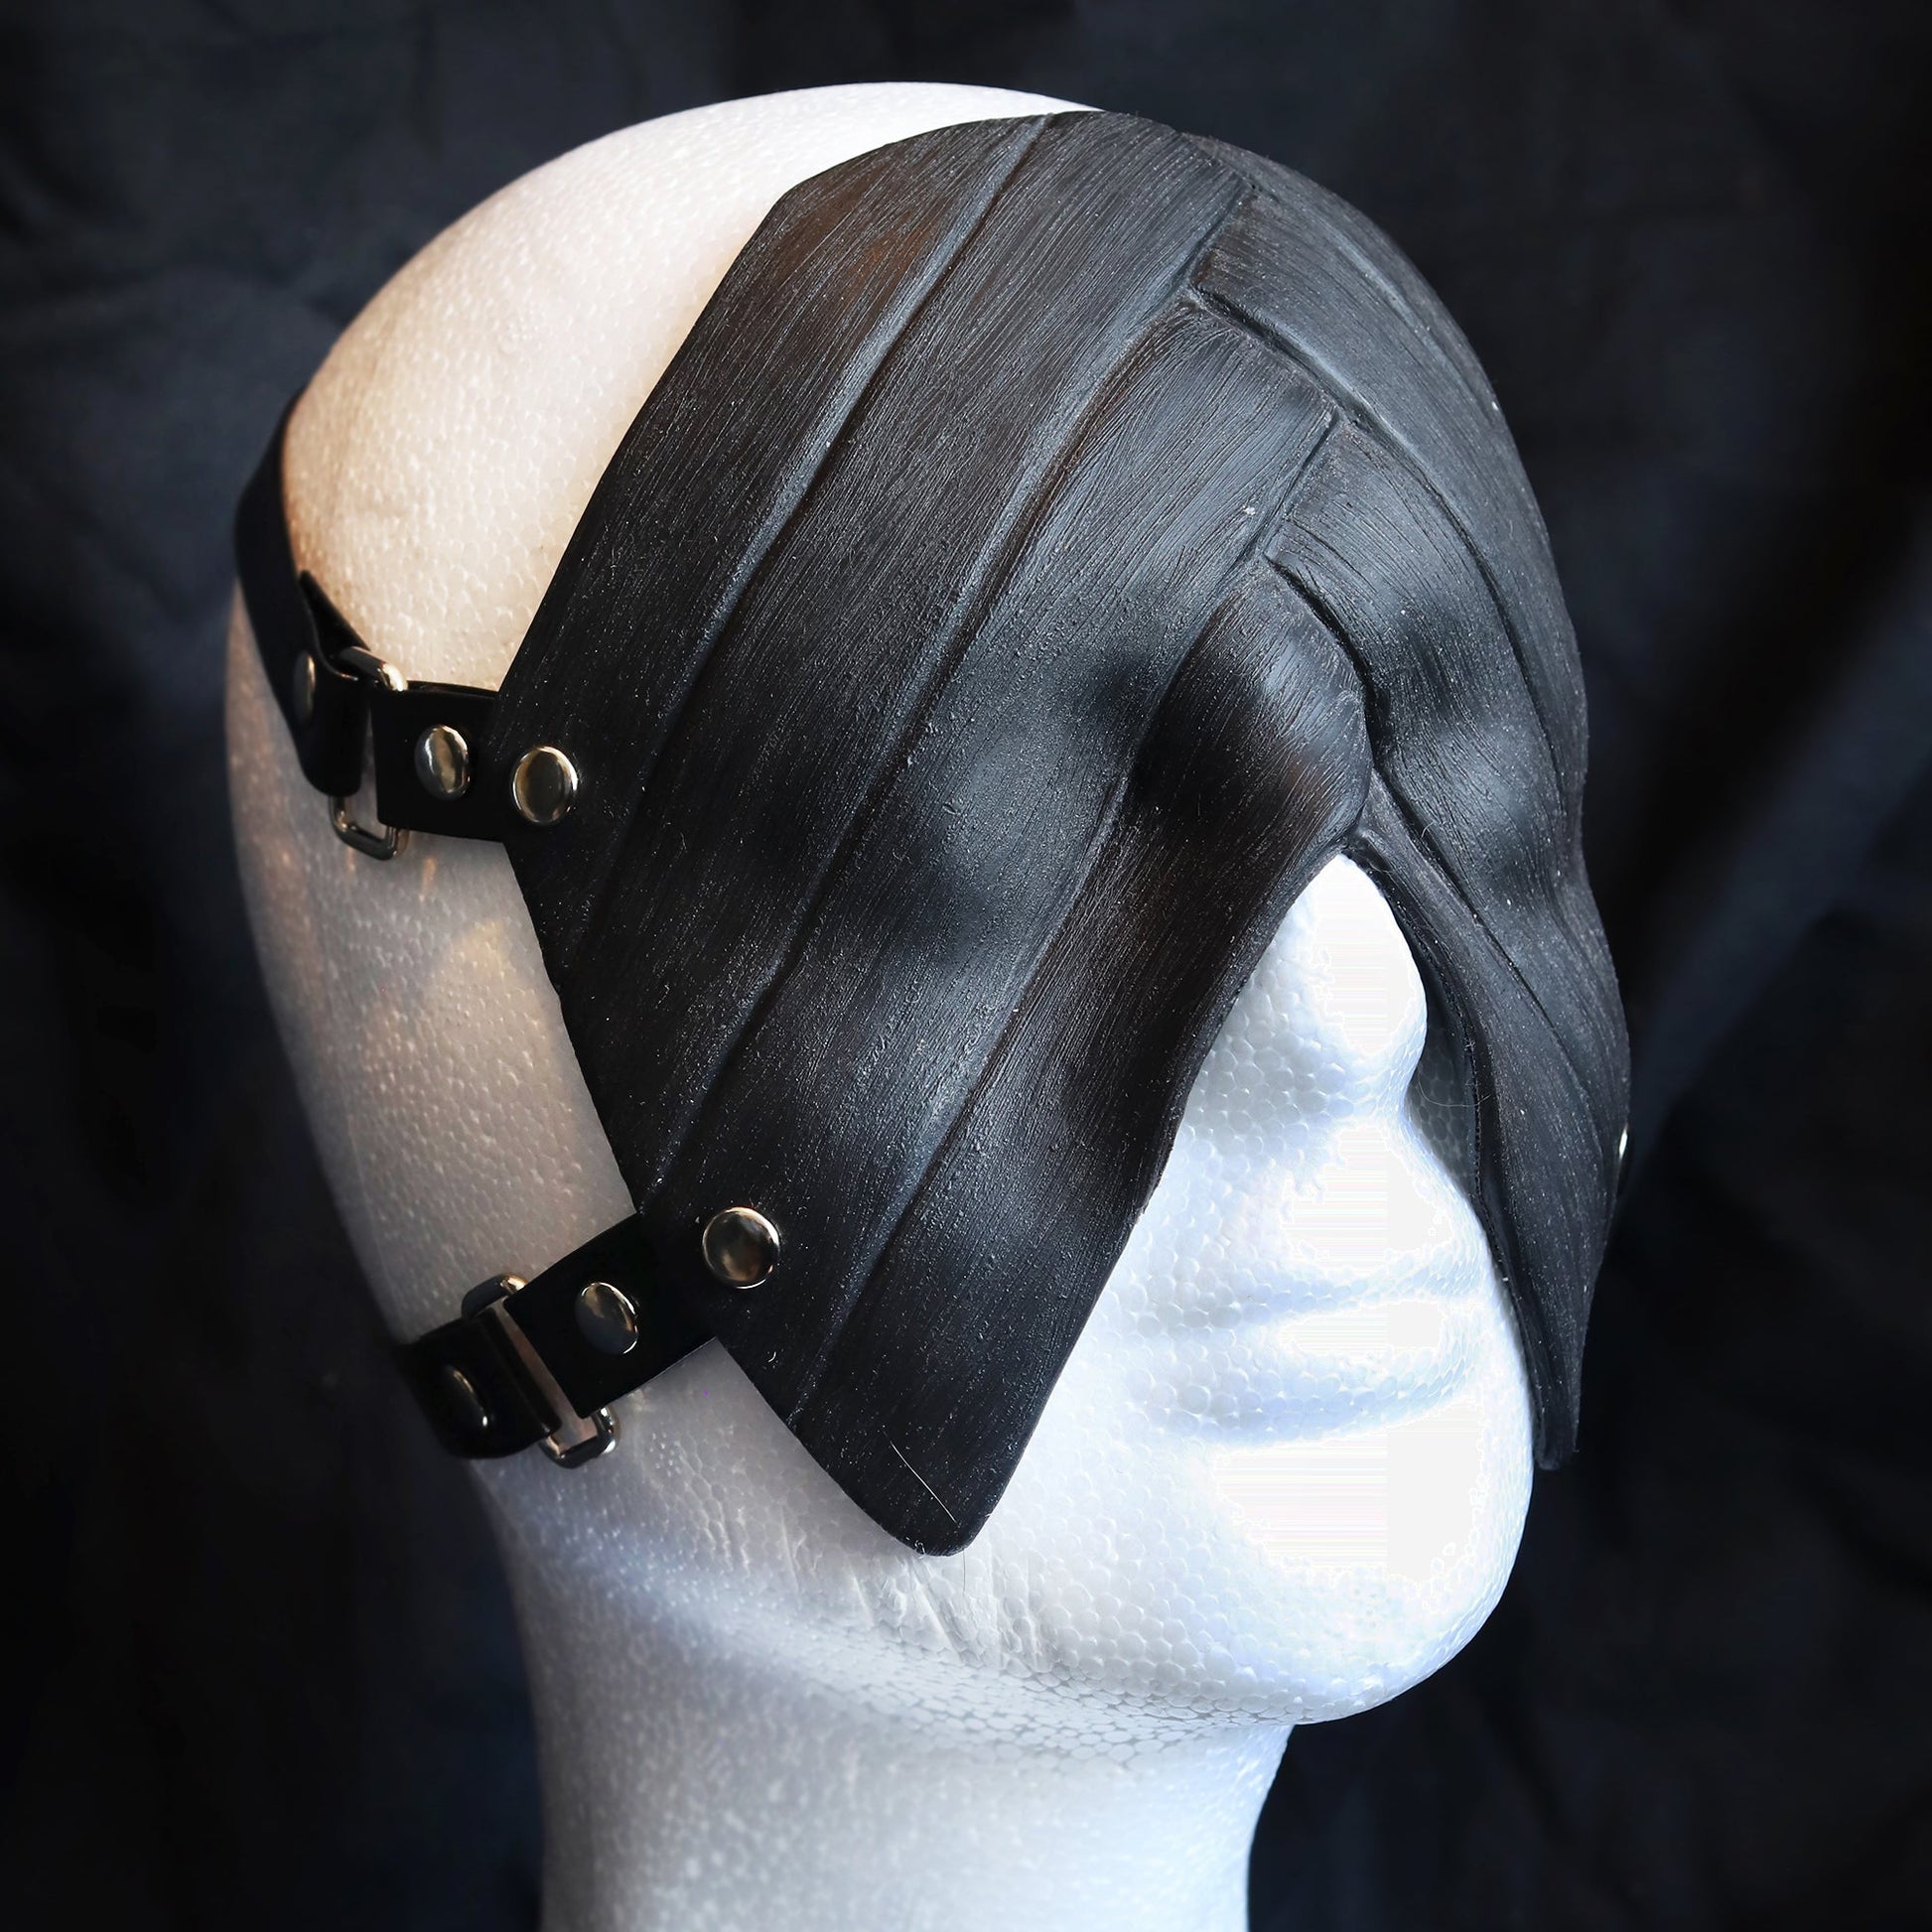 Black silicone blindfold on a white mannequin